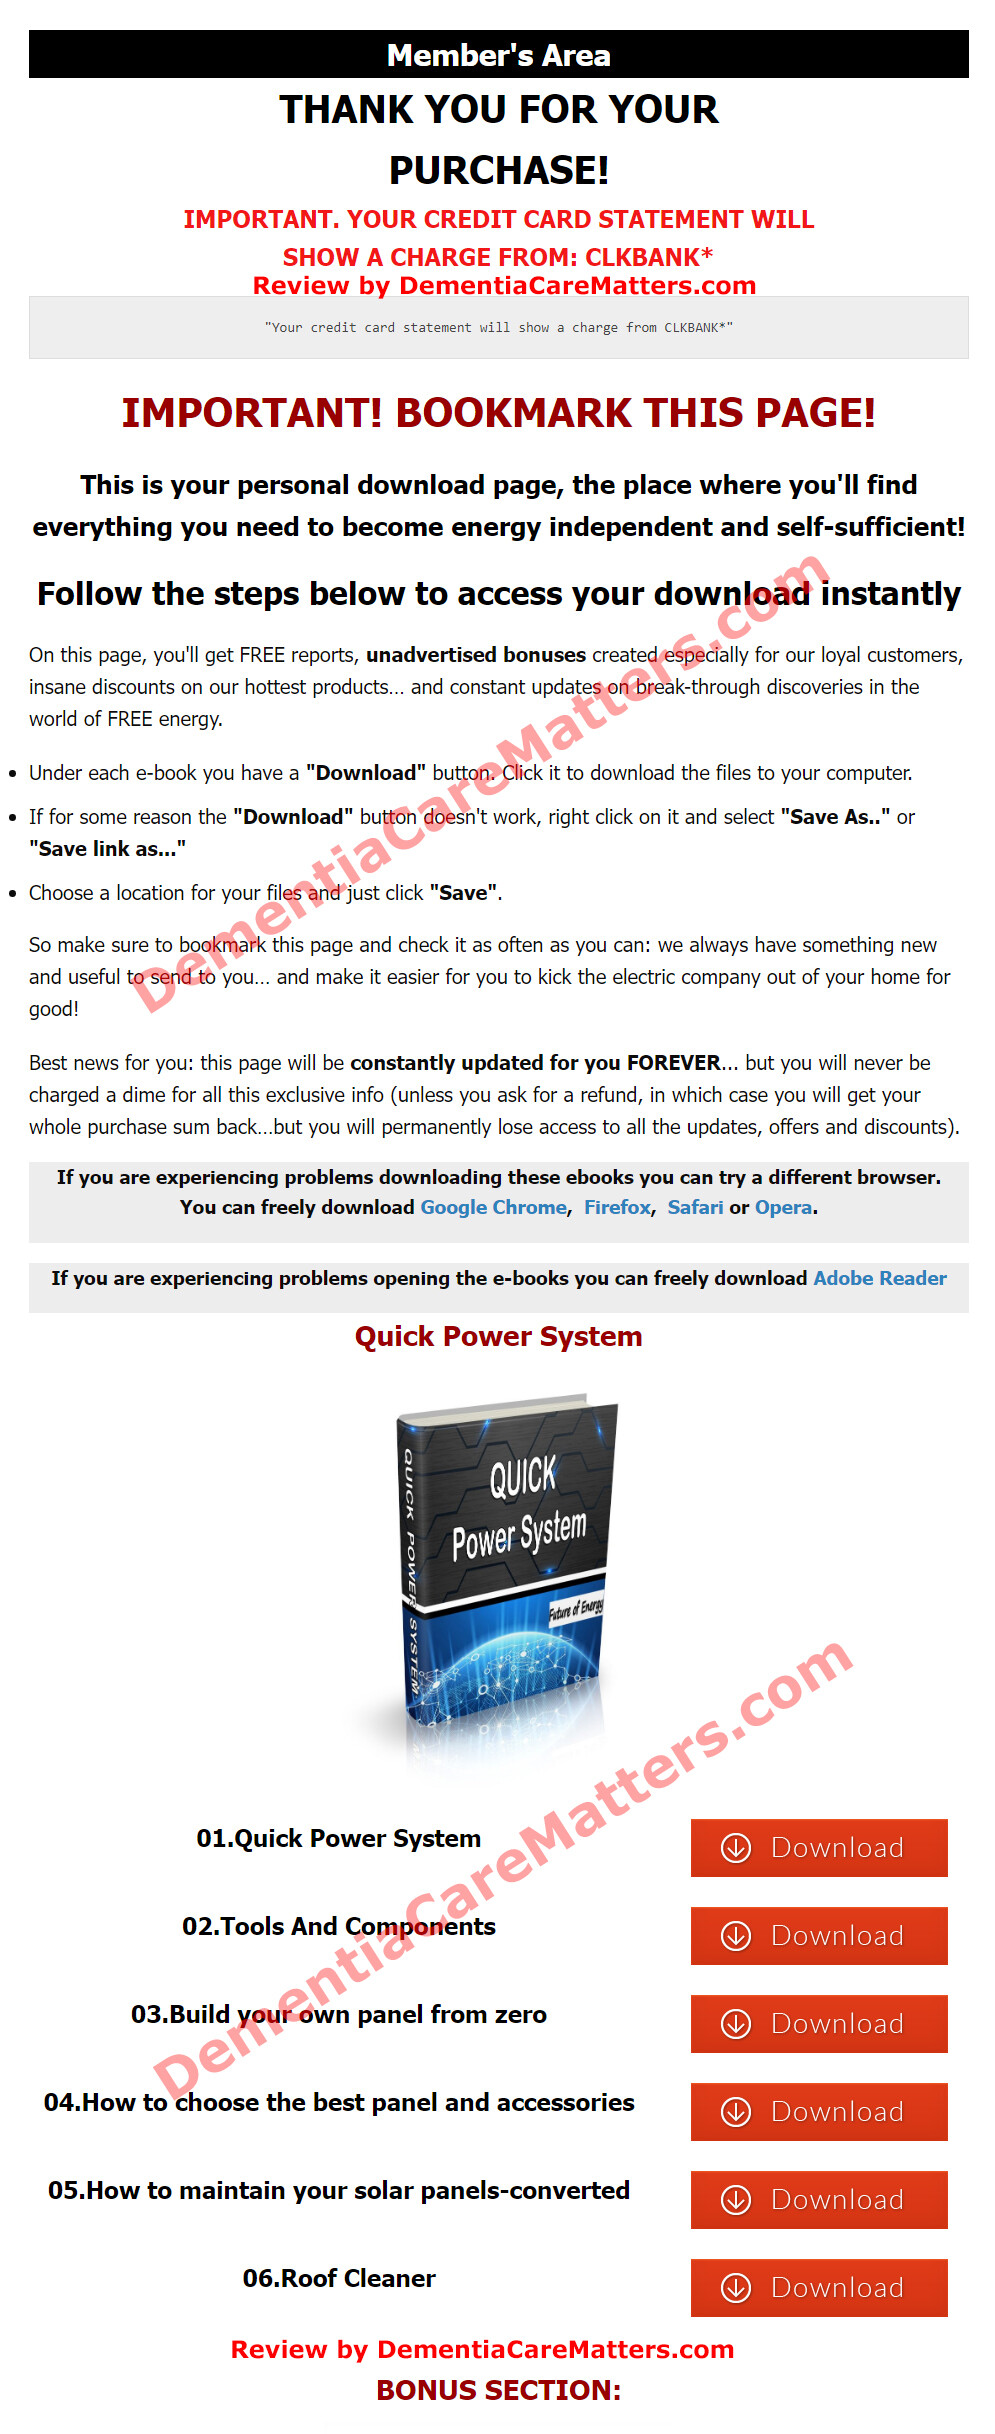 quick power system download page